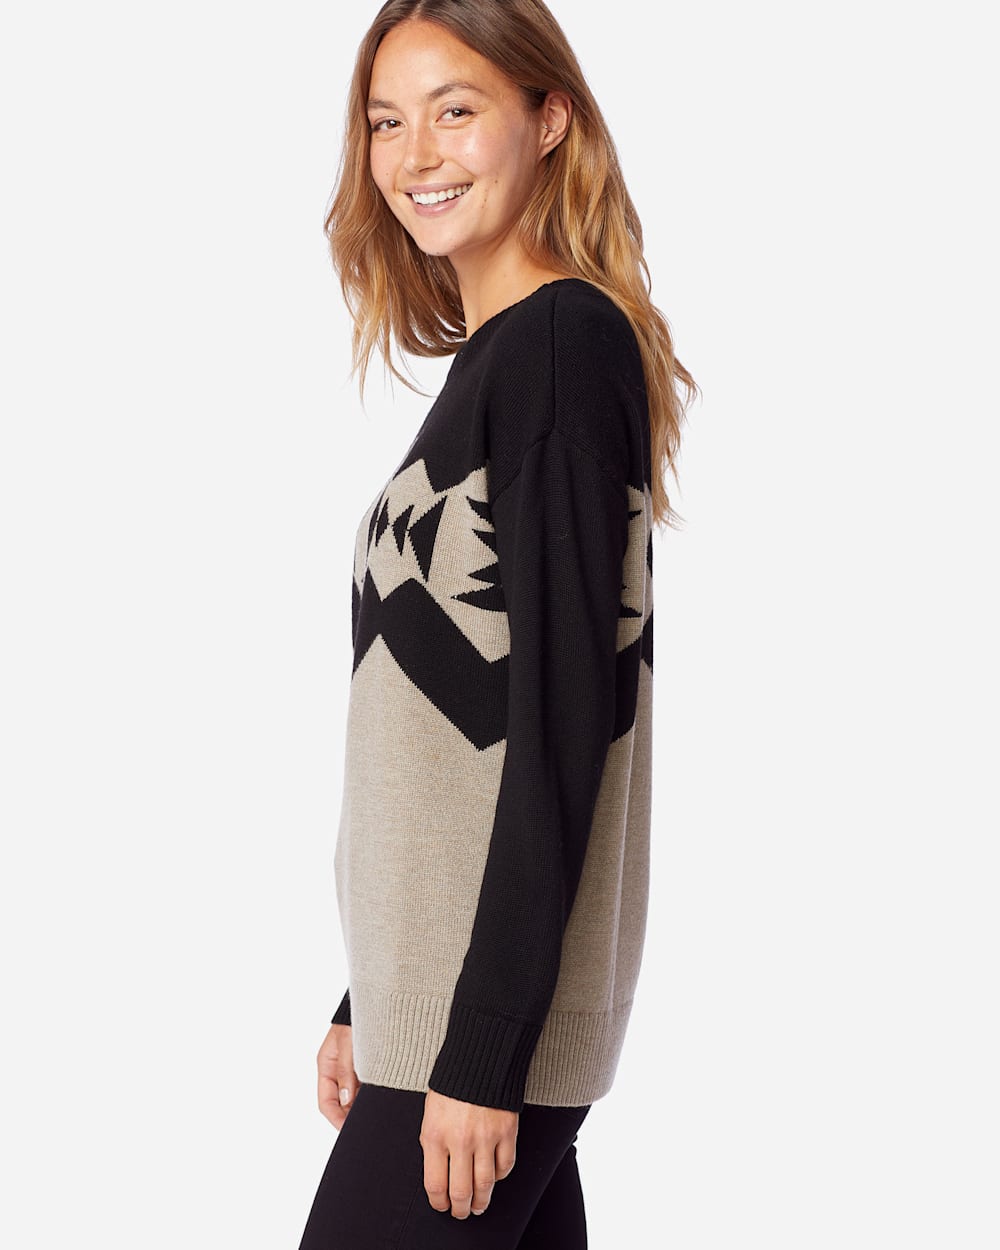 ALTERNATE VIEW OF WOMEN'S SONORA MERINO PULLOVER IN TAUPE HEATHER/BLACK image number 2